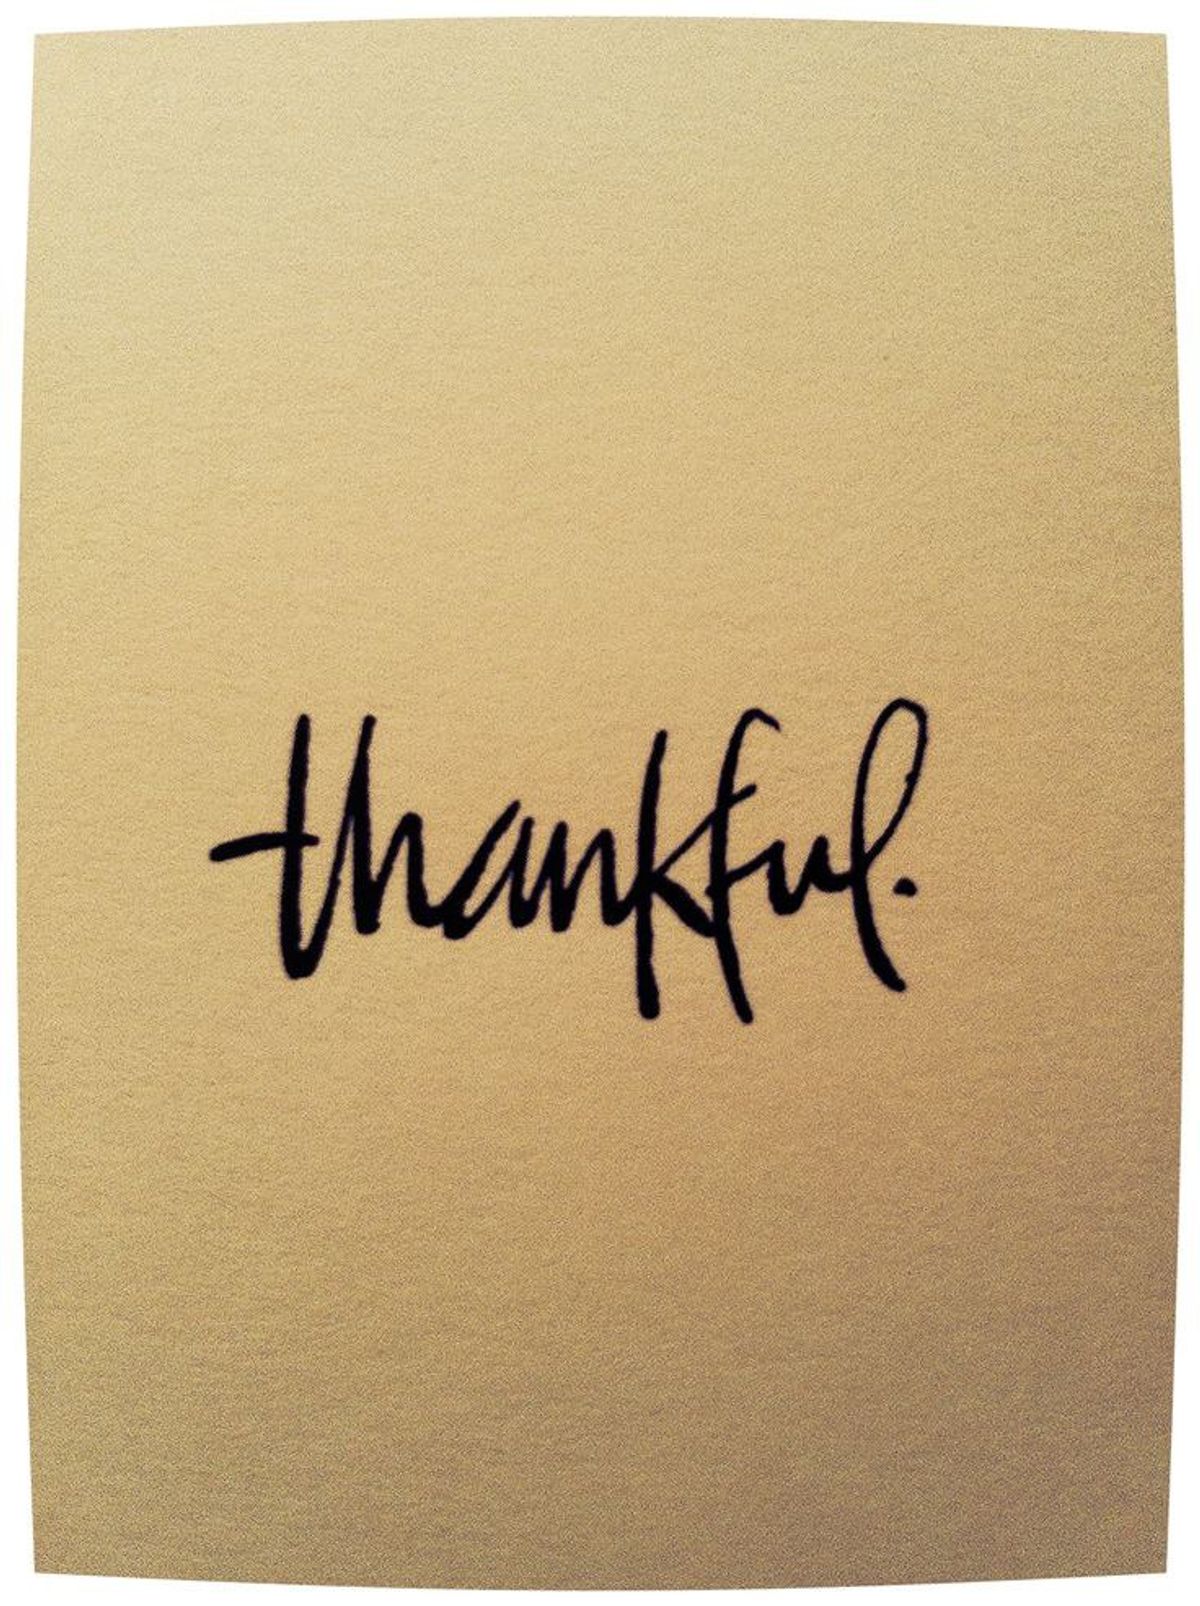 Remember What To Always Be Thankful For